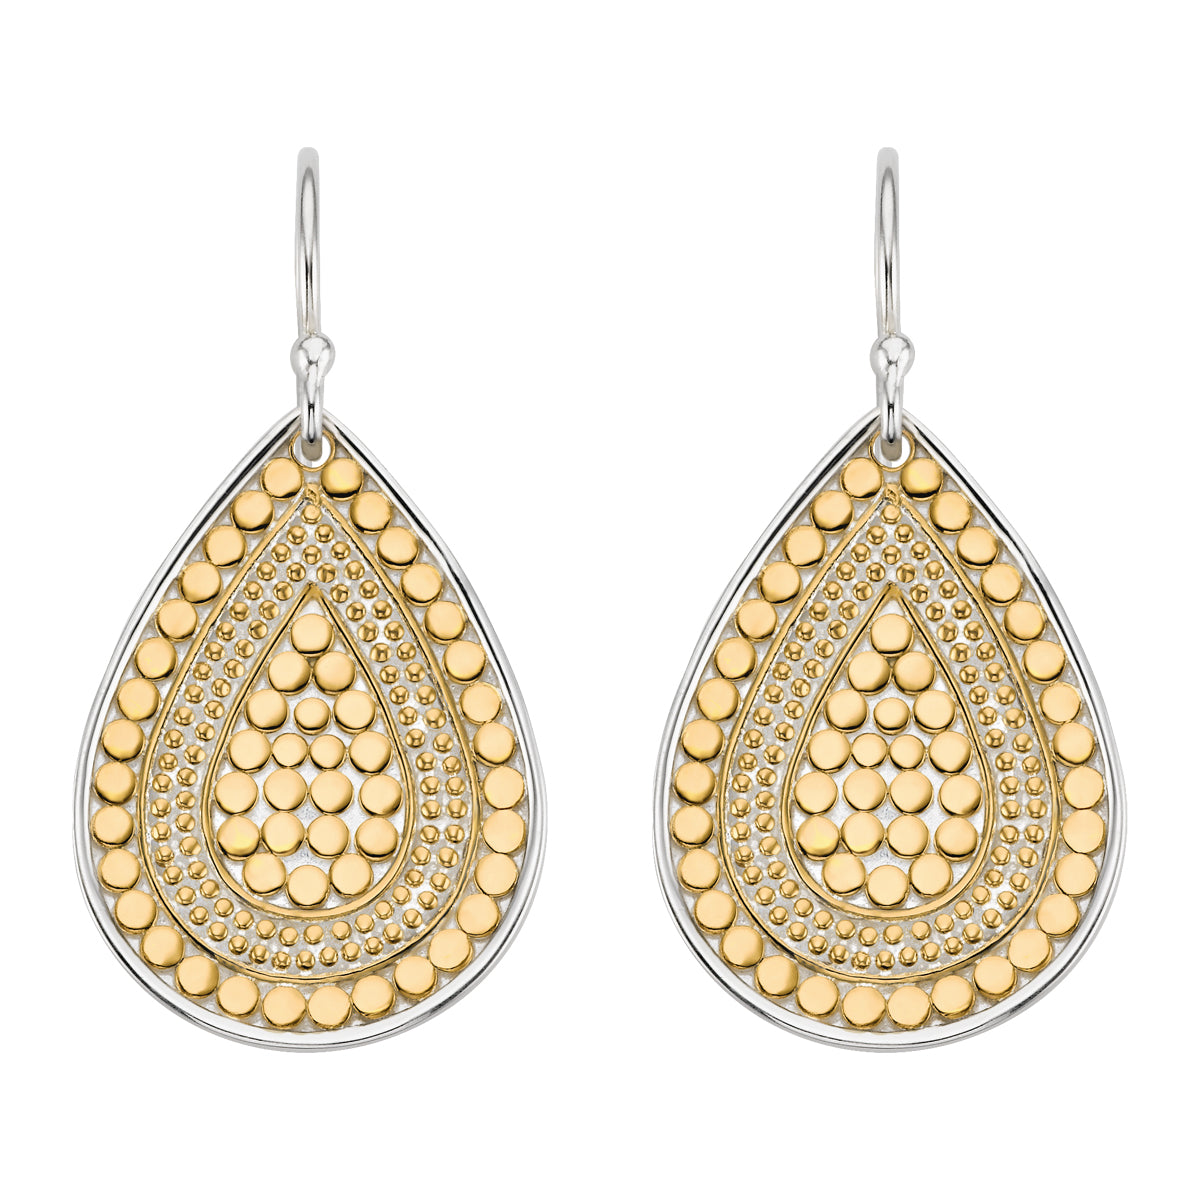 Ana Beck 18k gold plated and sterling silver Small Teardrop Earrings - Gold